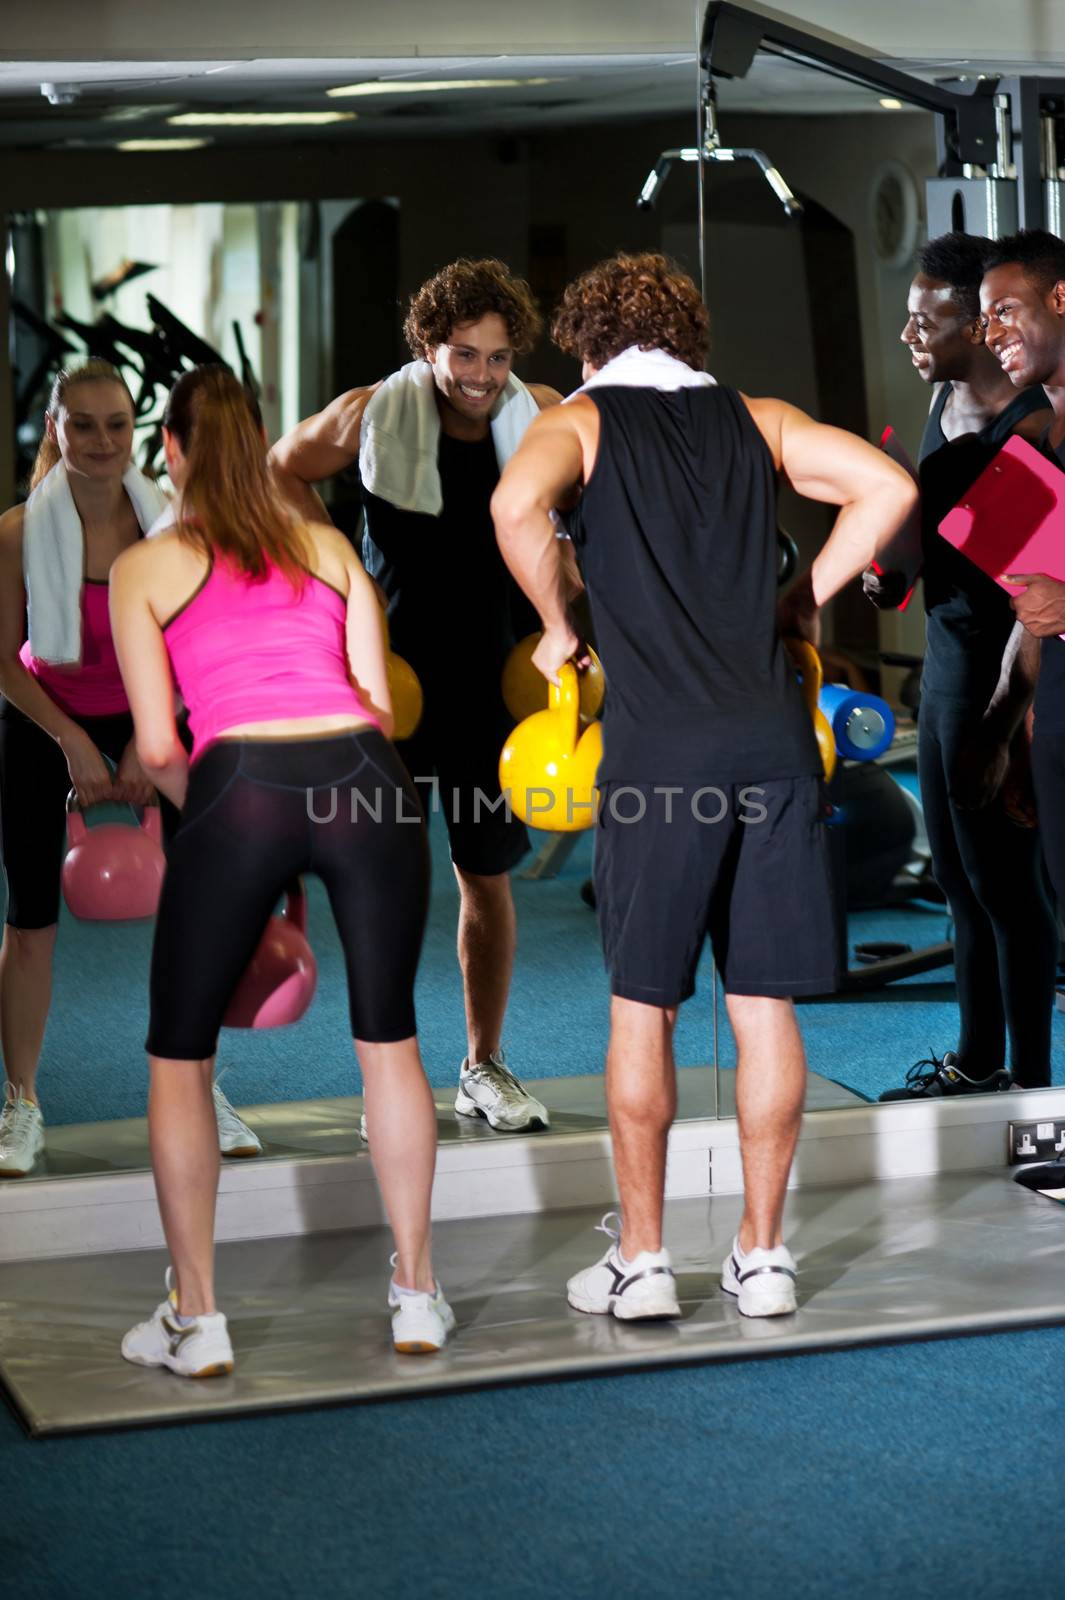 Male instructor keeping an eye on active gym members